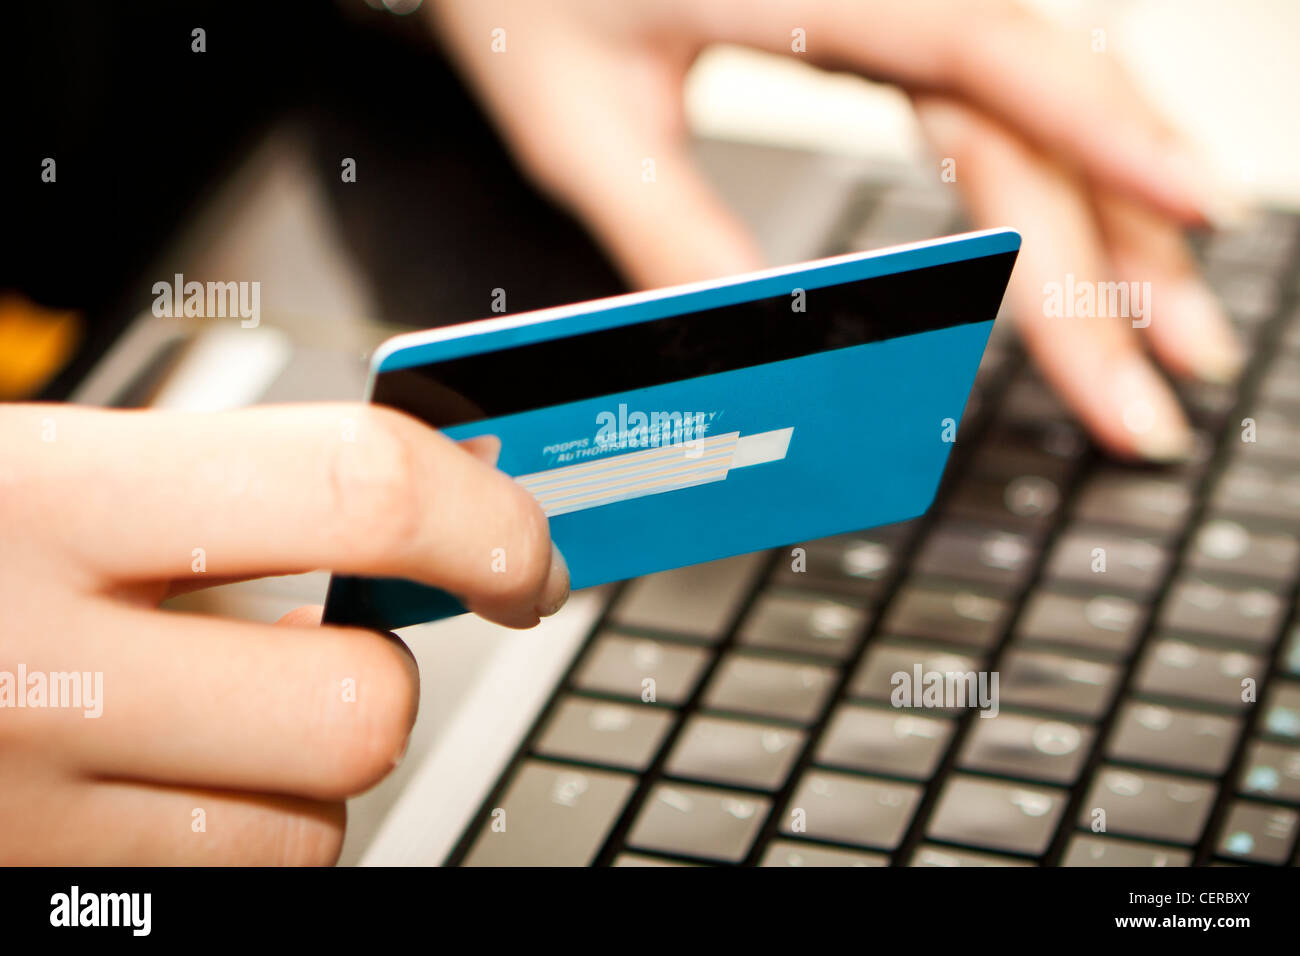 Hands entering credit card information into a laptop Stock Photo